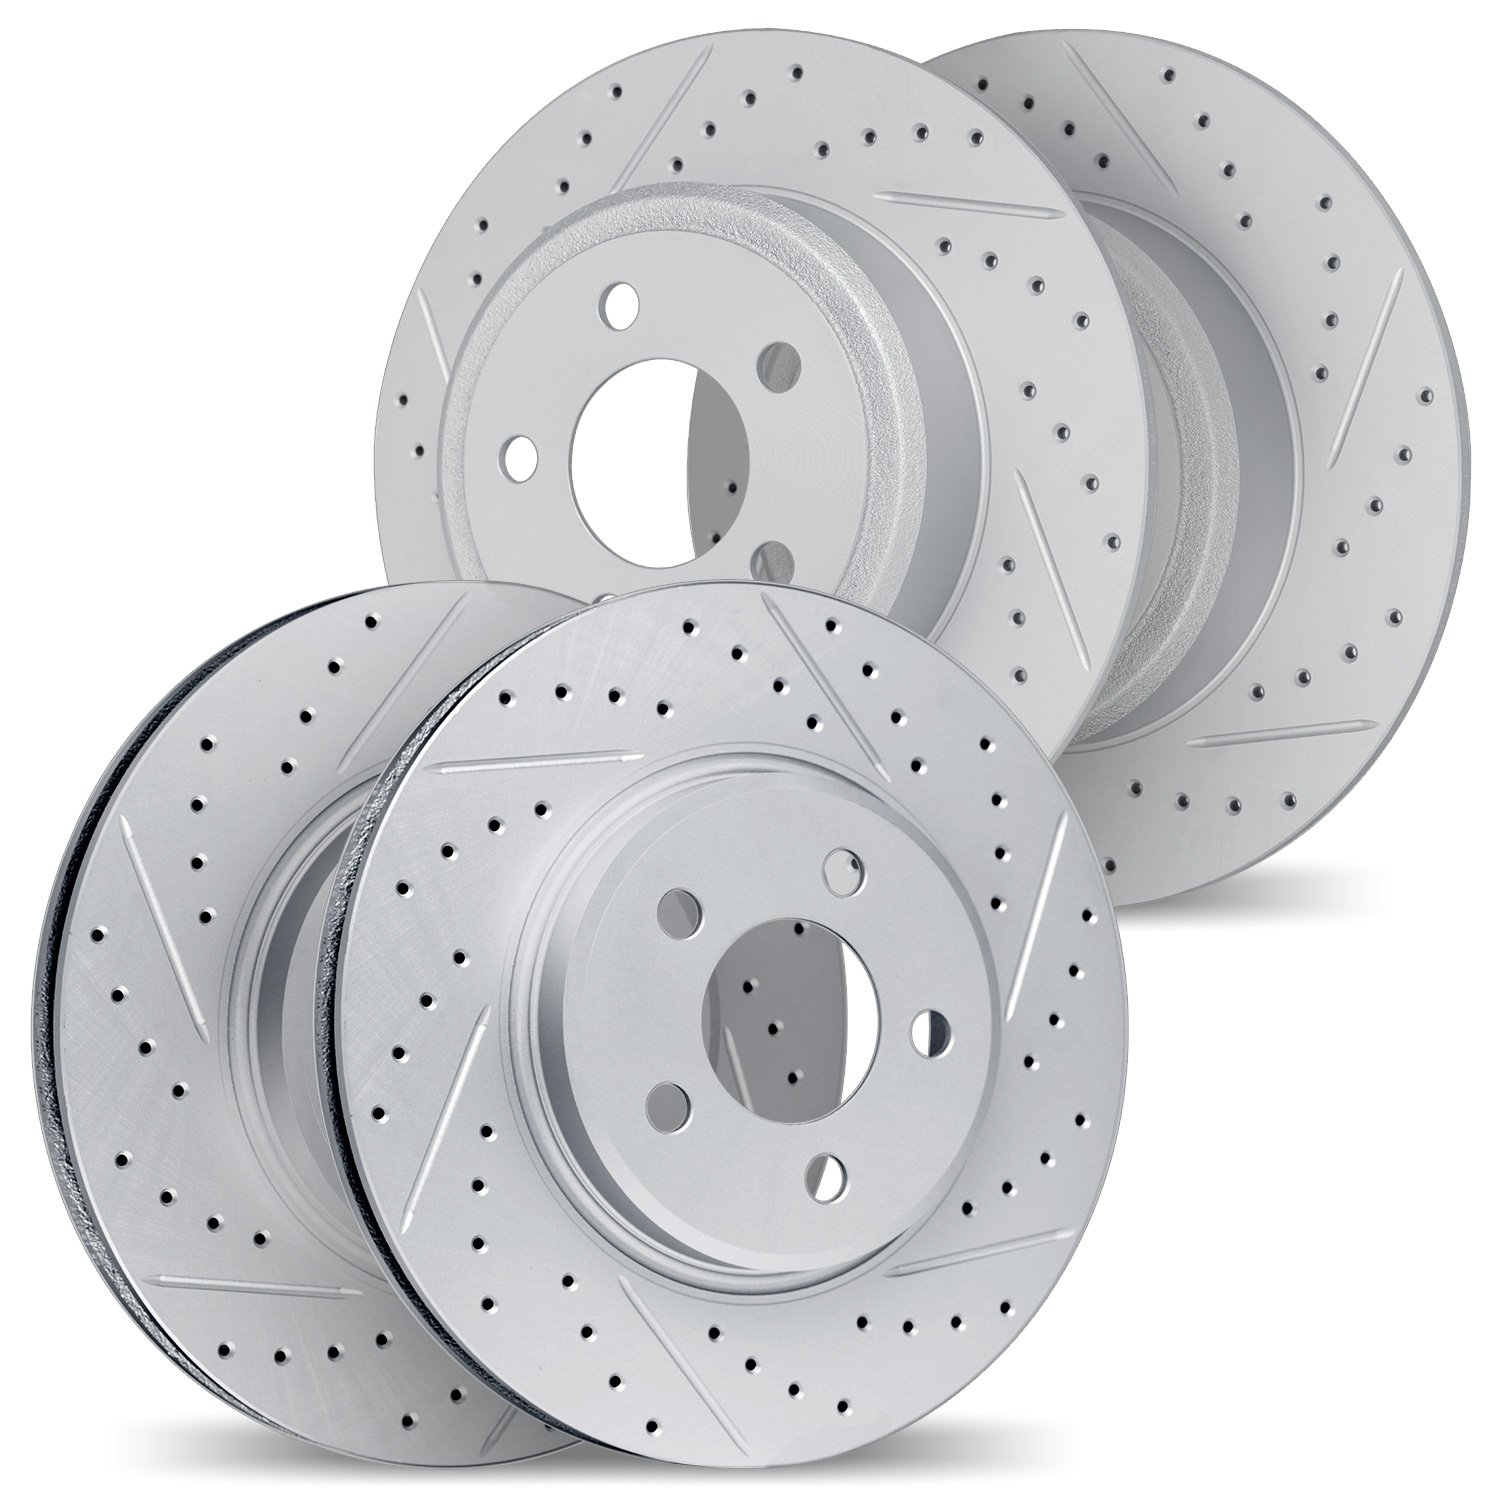 2004-80008 Geoperformance Drilled/Slotted Brake Rotors, 2014-2016 Ford/Lincoln/Mercury/Mazda, Position: Front and Rear